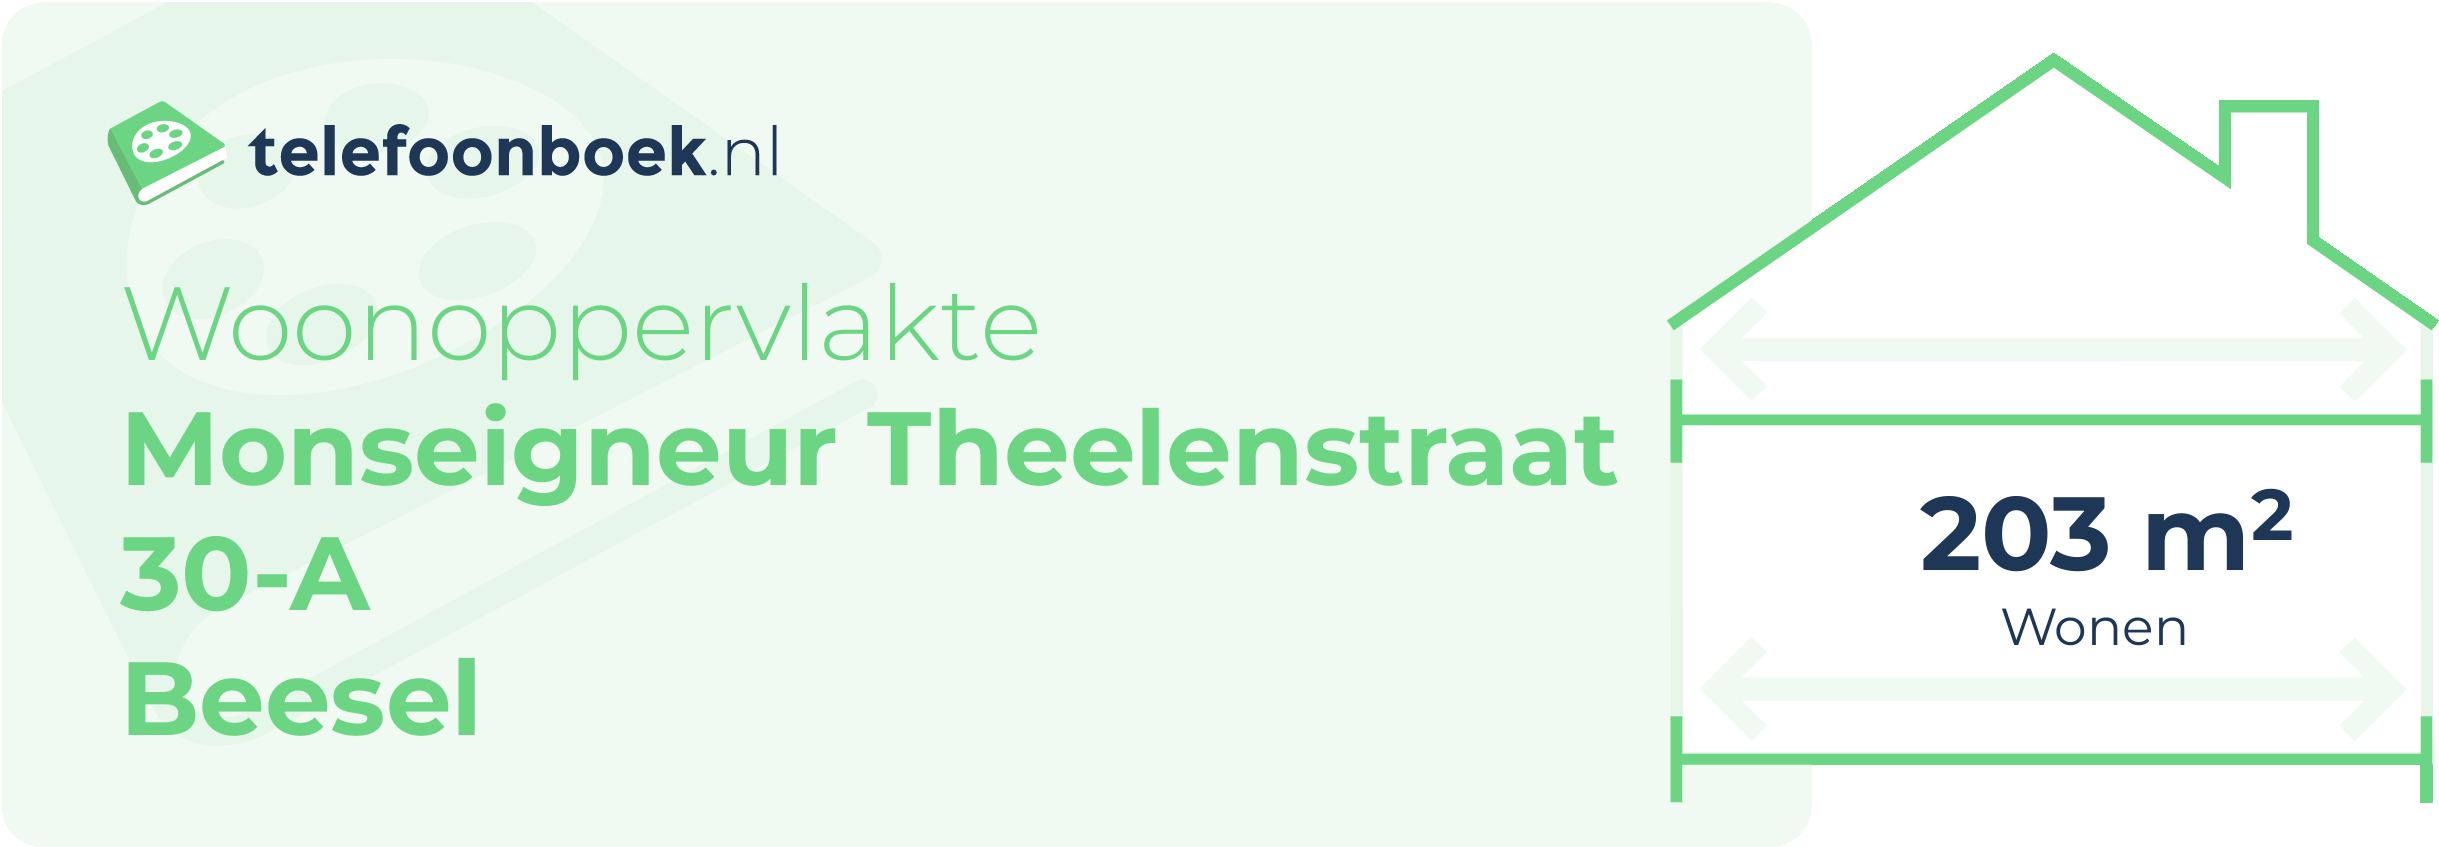 Woonoppervlakte Monseigneur Theelenstraat 30-A Beesel